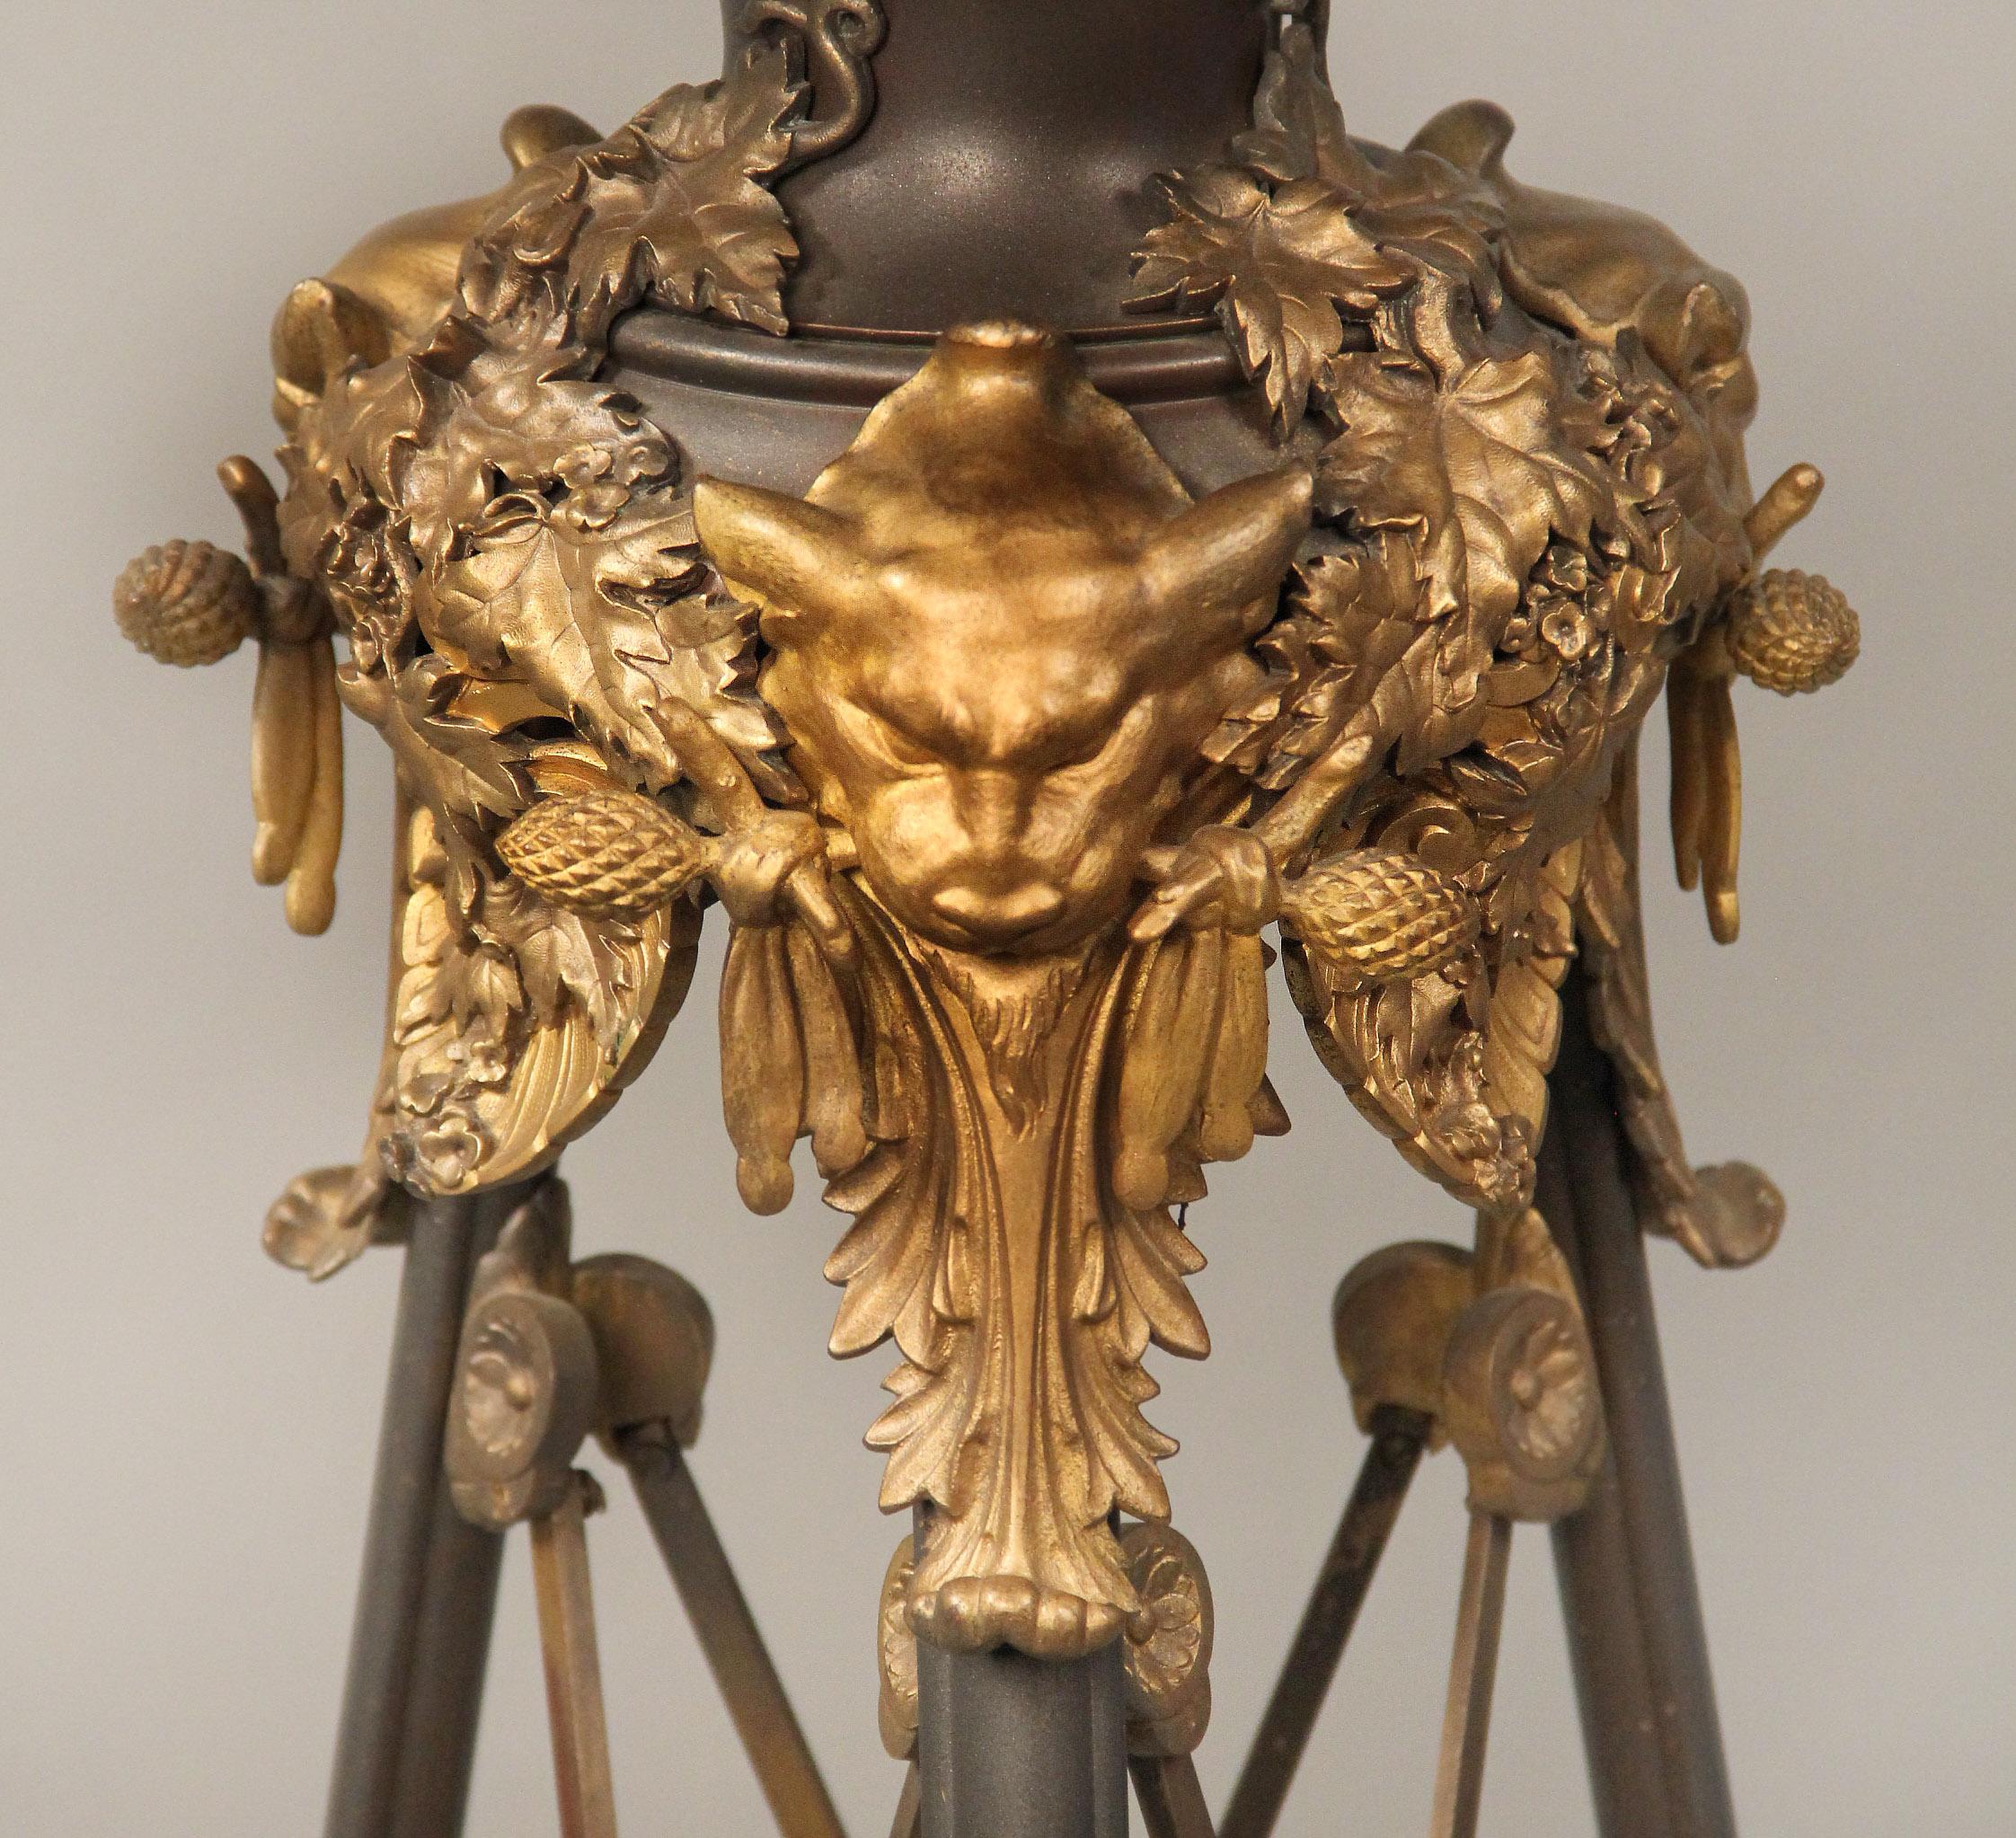 Gilt Late 19th Century Bronze and Onyx “Athenian” Pedestal Table by Georges Servant